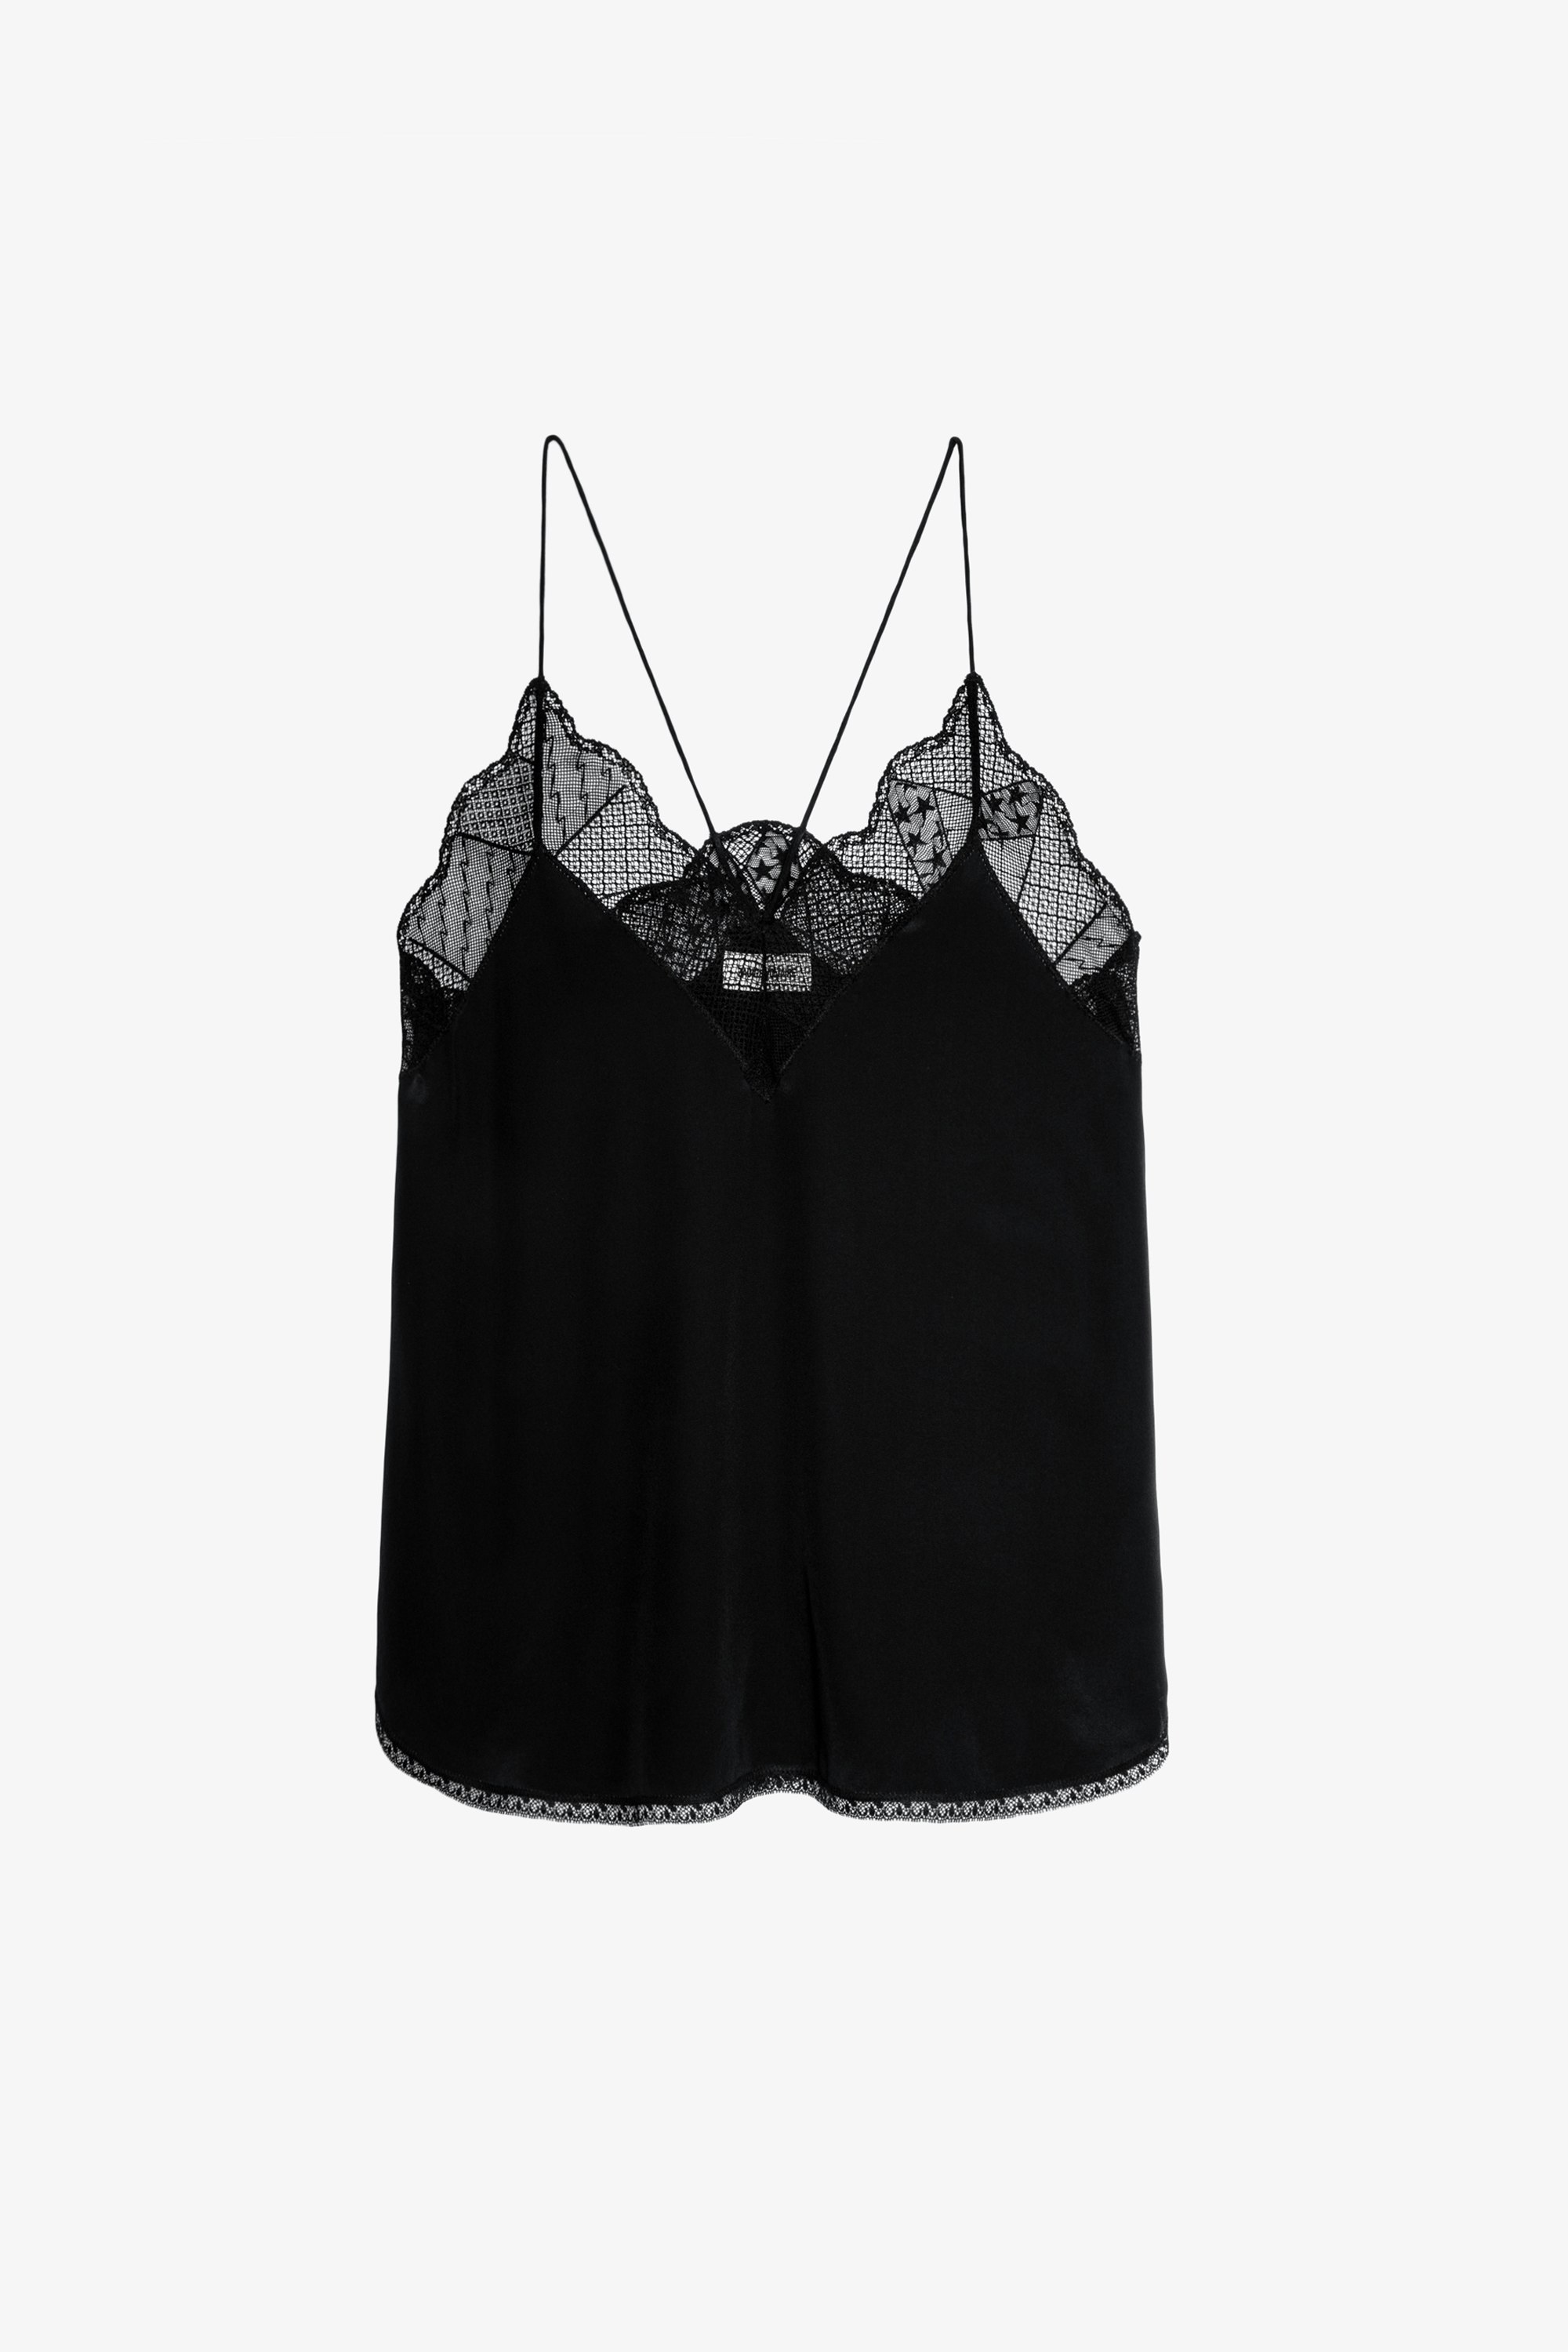 Christy Silk Camisole - Silk and lace camisole